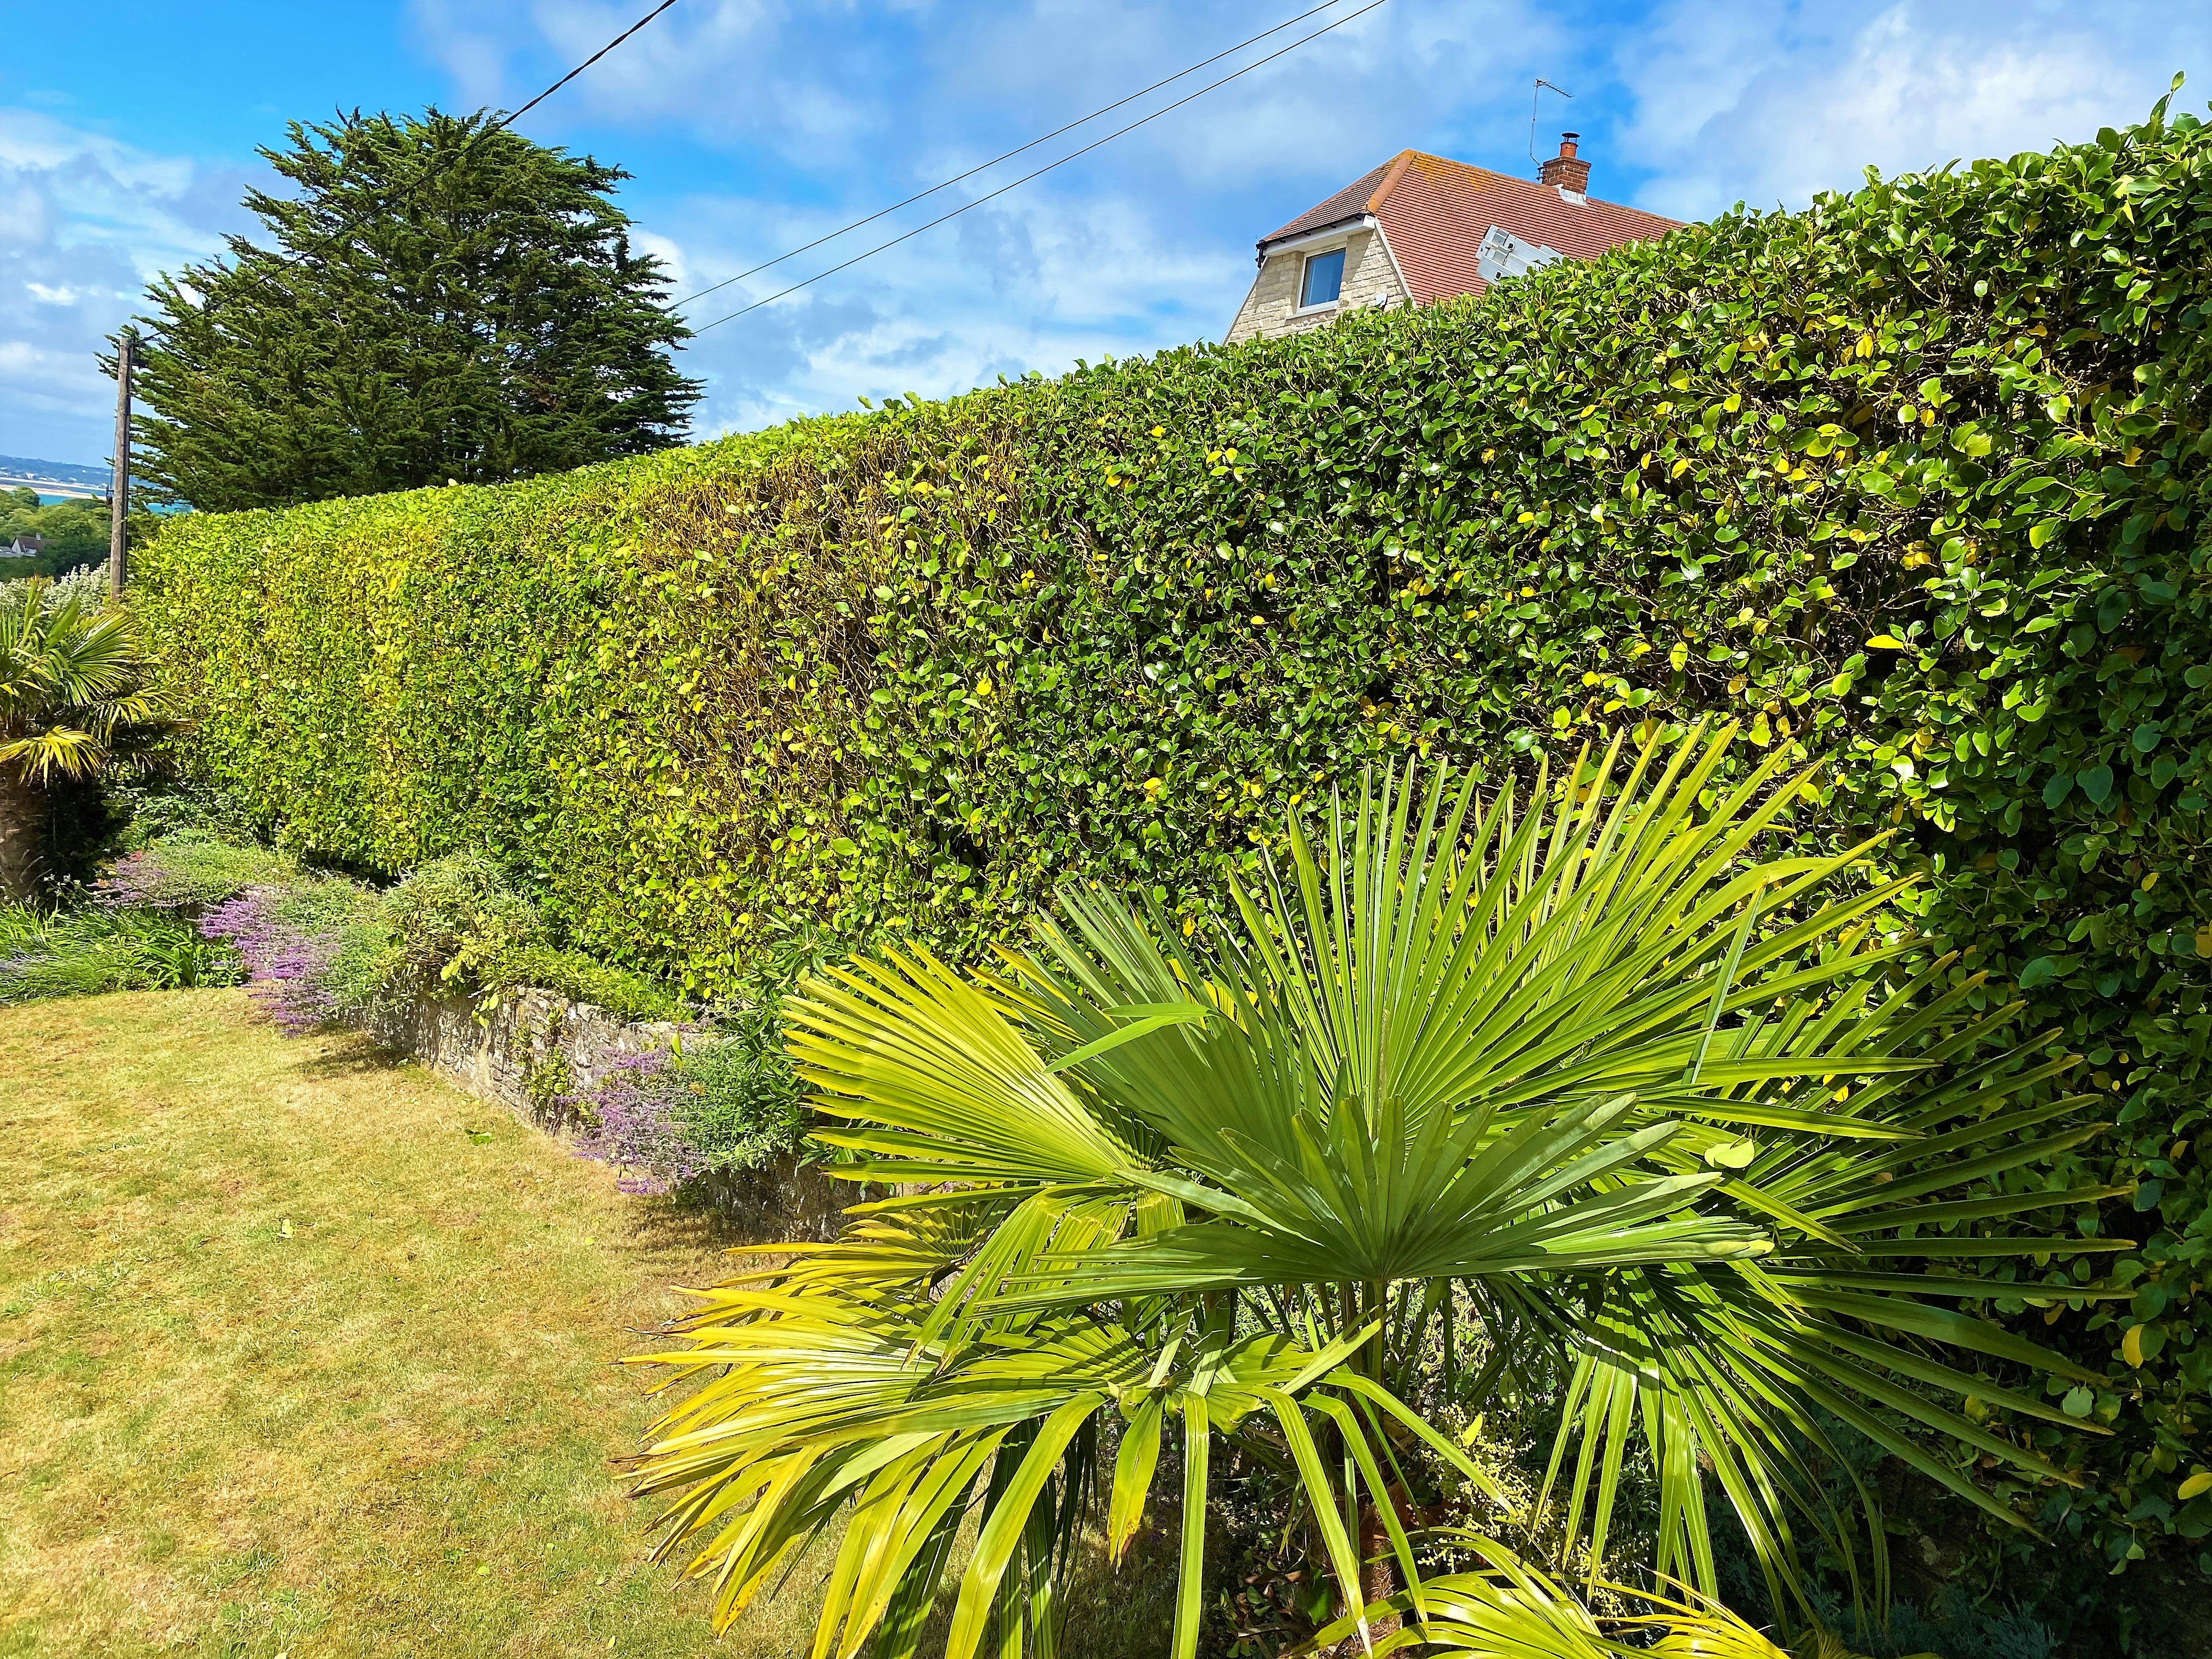 Hedge removal Dorchester, Weymouth &  Portland, Dorset - Dorset Treeworx offering hedge services that cover hedge trimming, cutting, pruning, reducing and stump grinding.